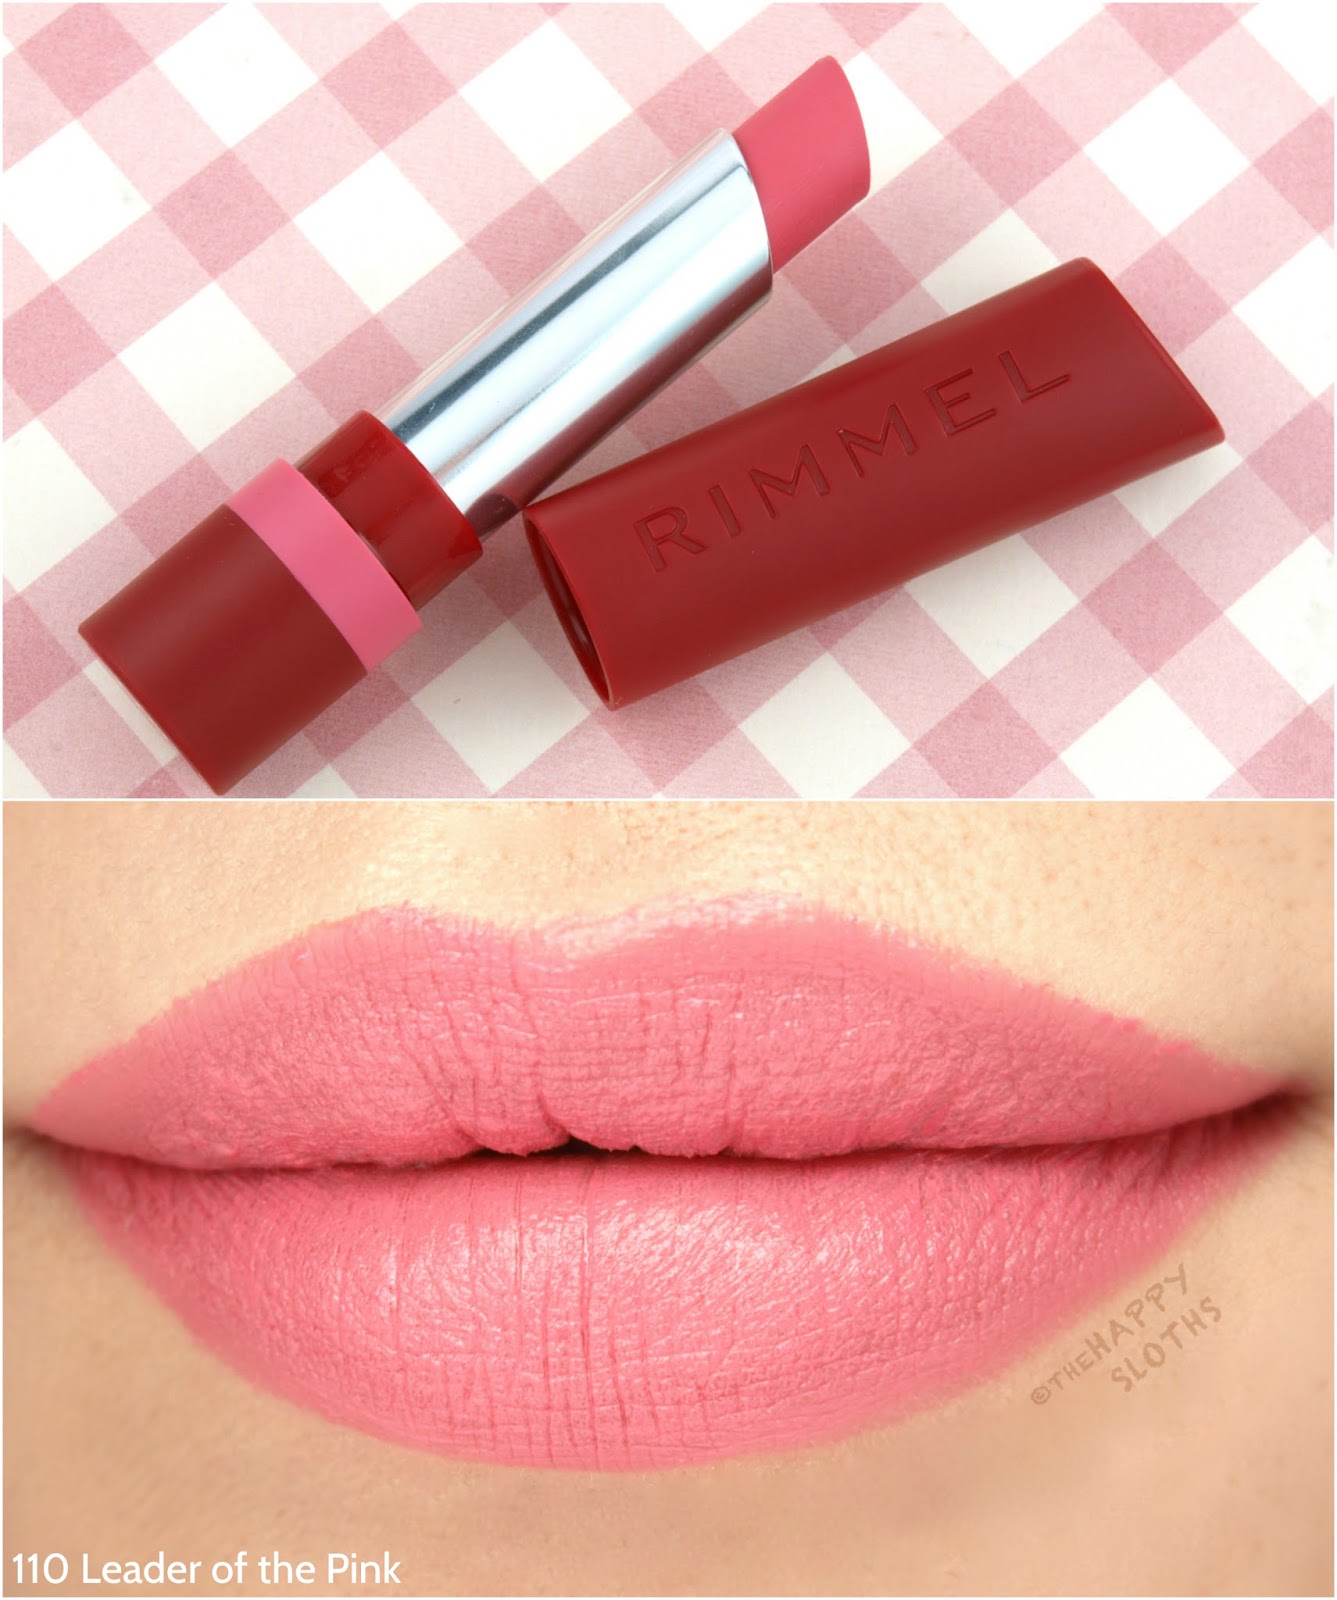 Rimmel London The Only 1 Matte Lipstick in "110 Leader of the Pink": Review and Swatches